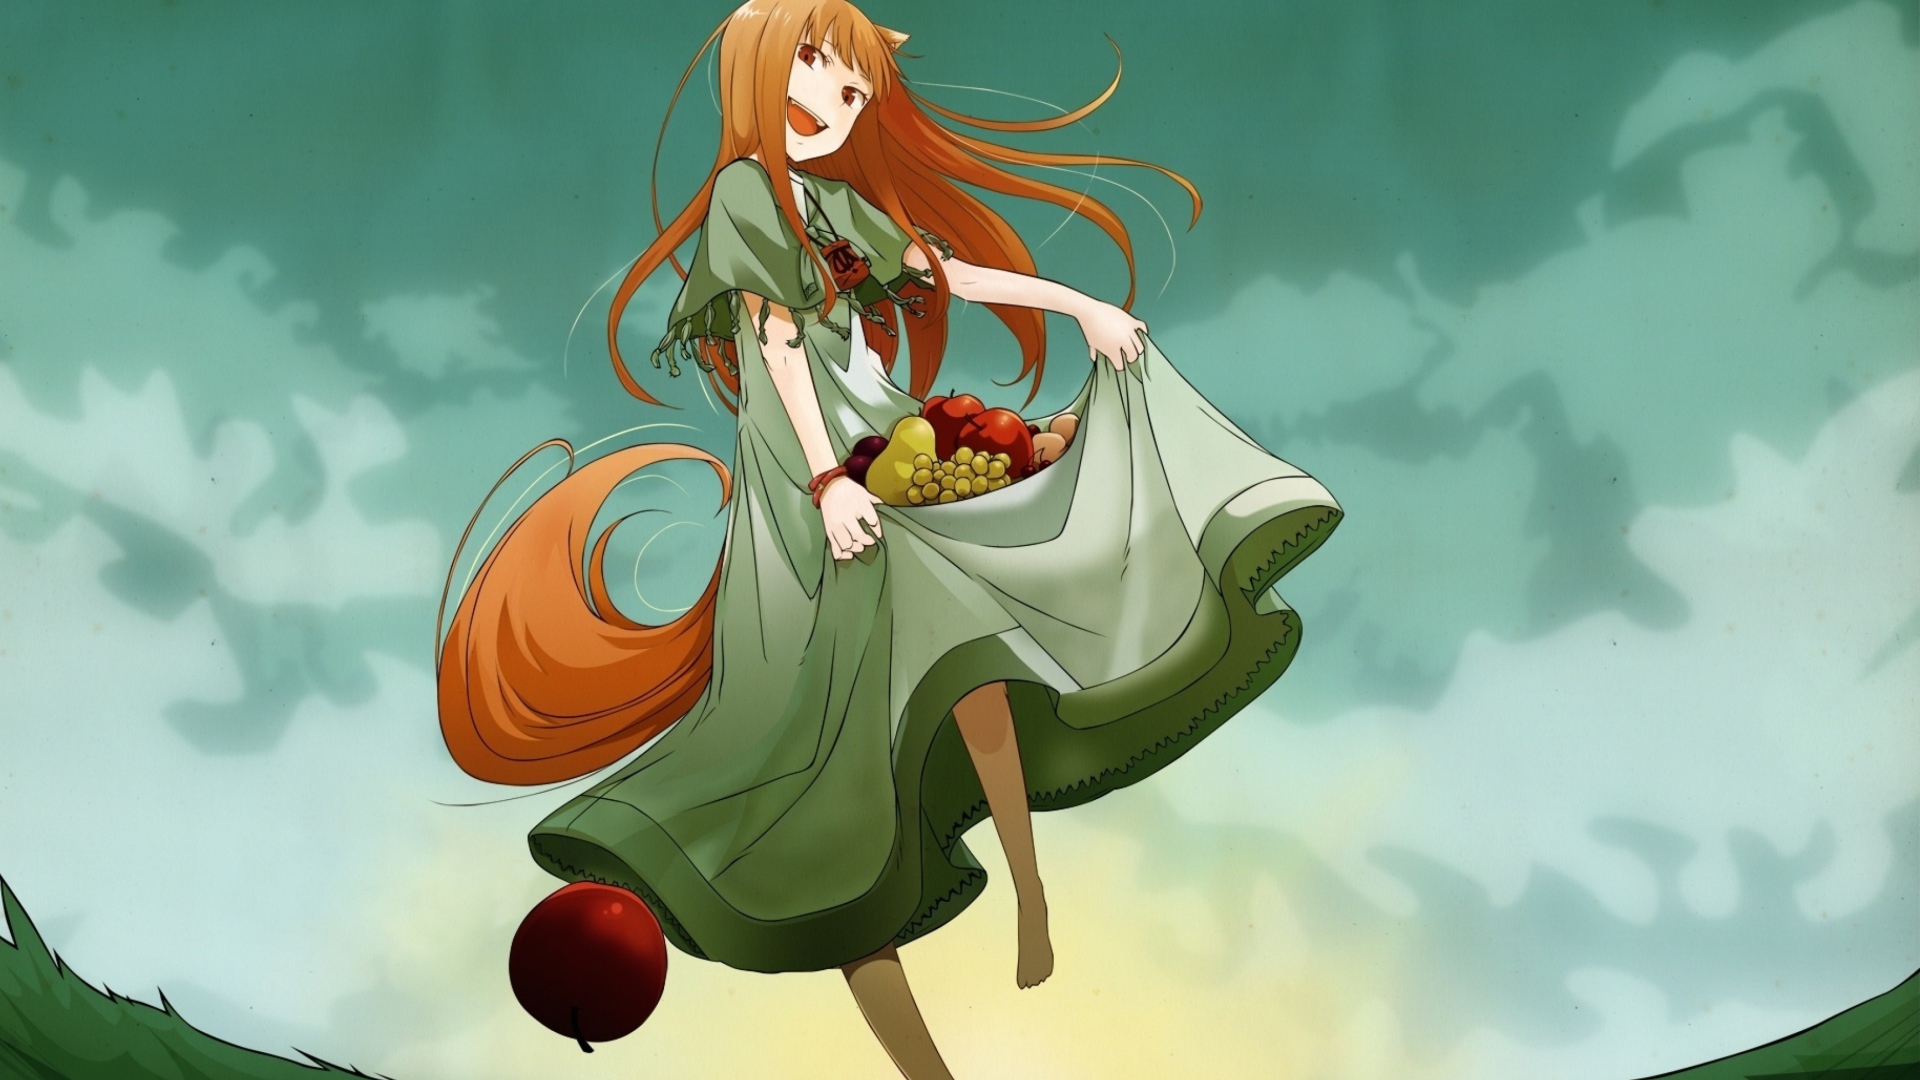 Spice and Wolf wallpaper 1920x1080